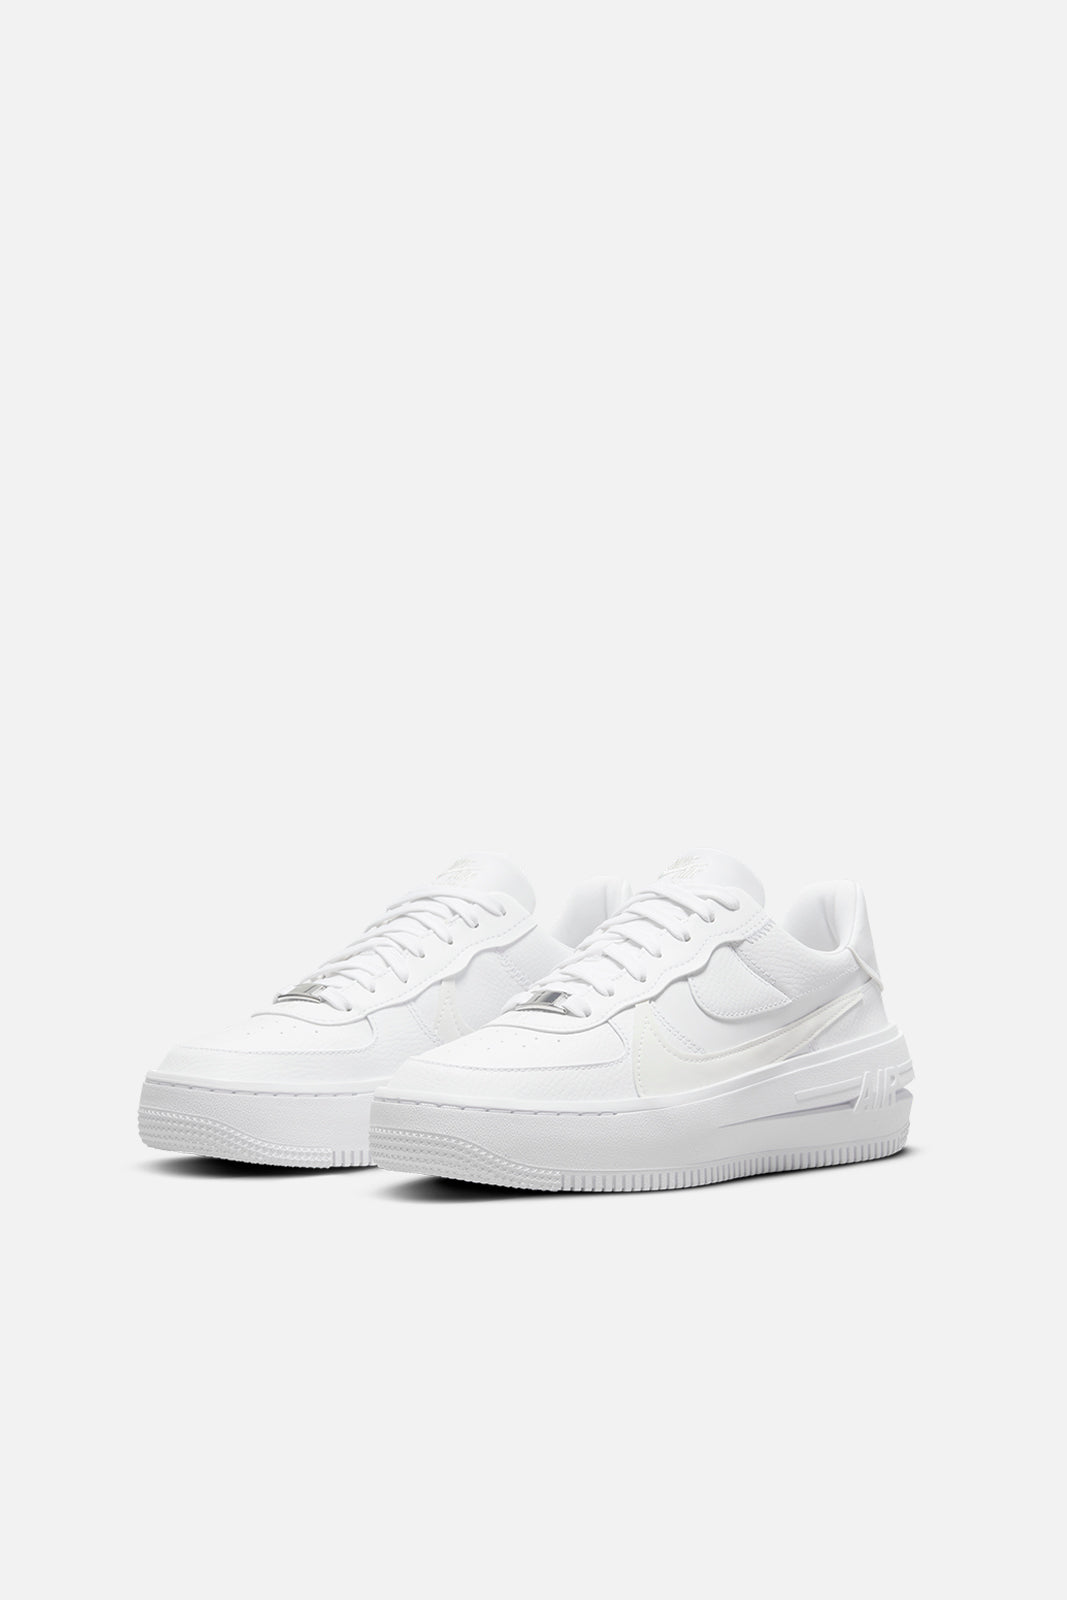 Nike Women's Air Force 1 PLT.AF.ORM Shoes